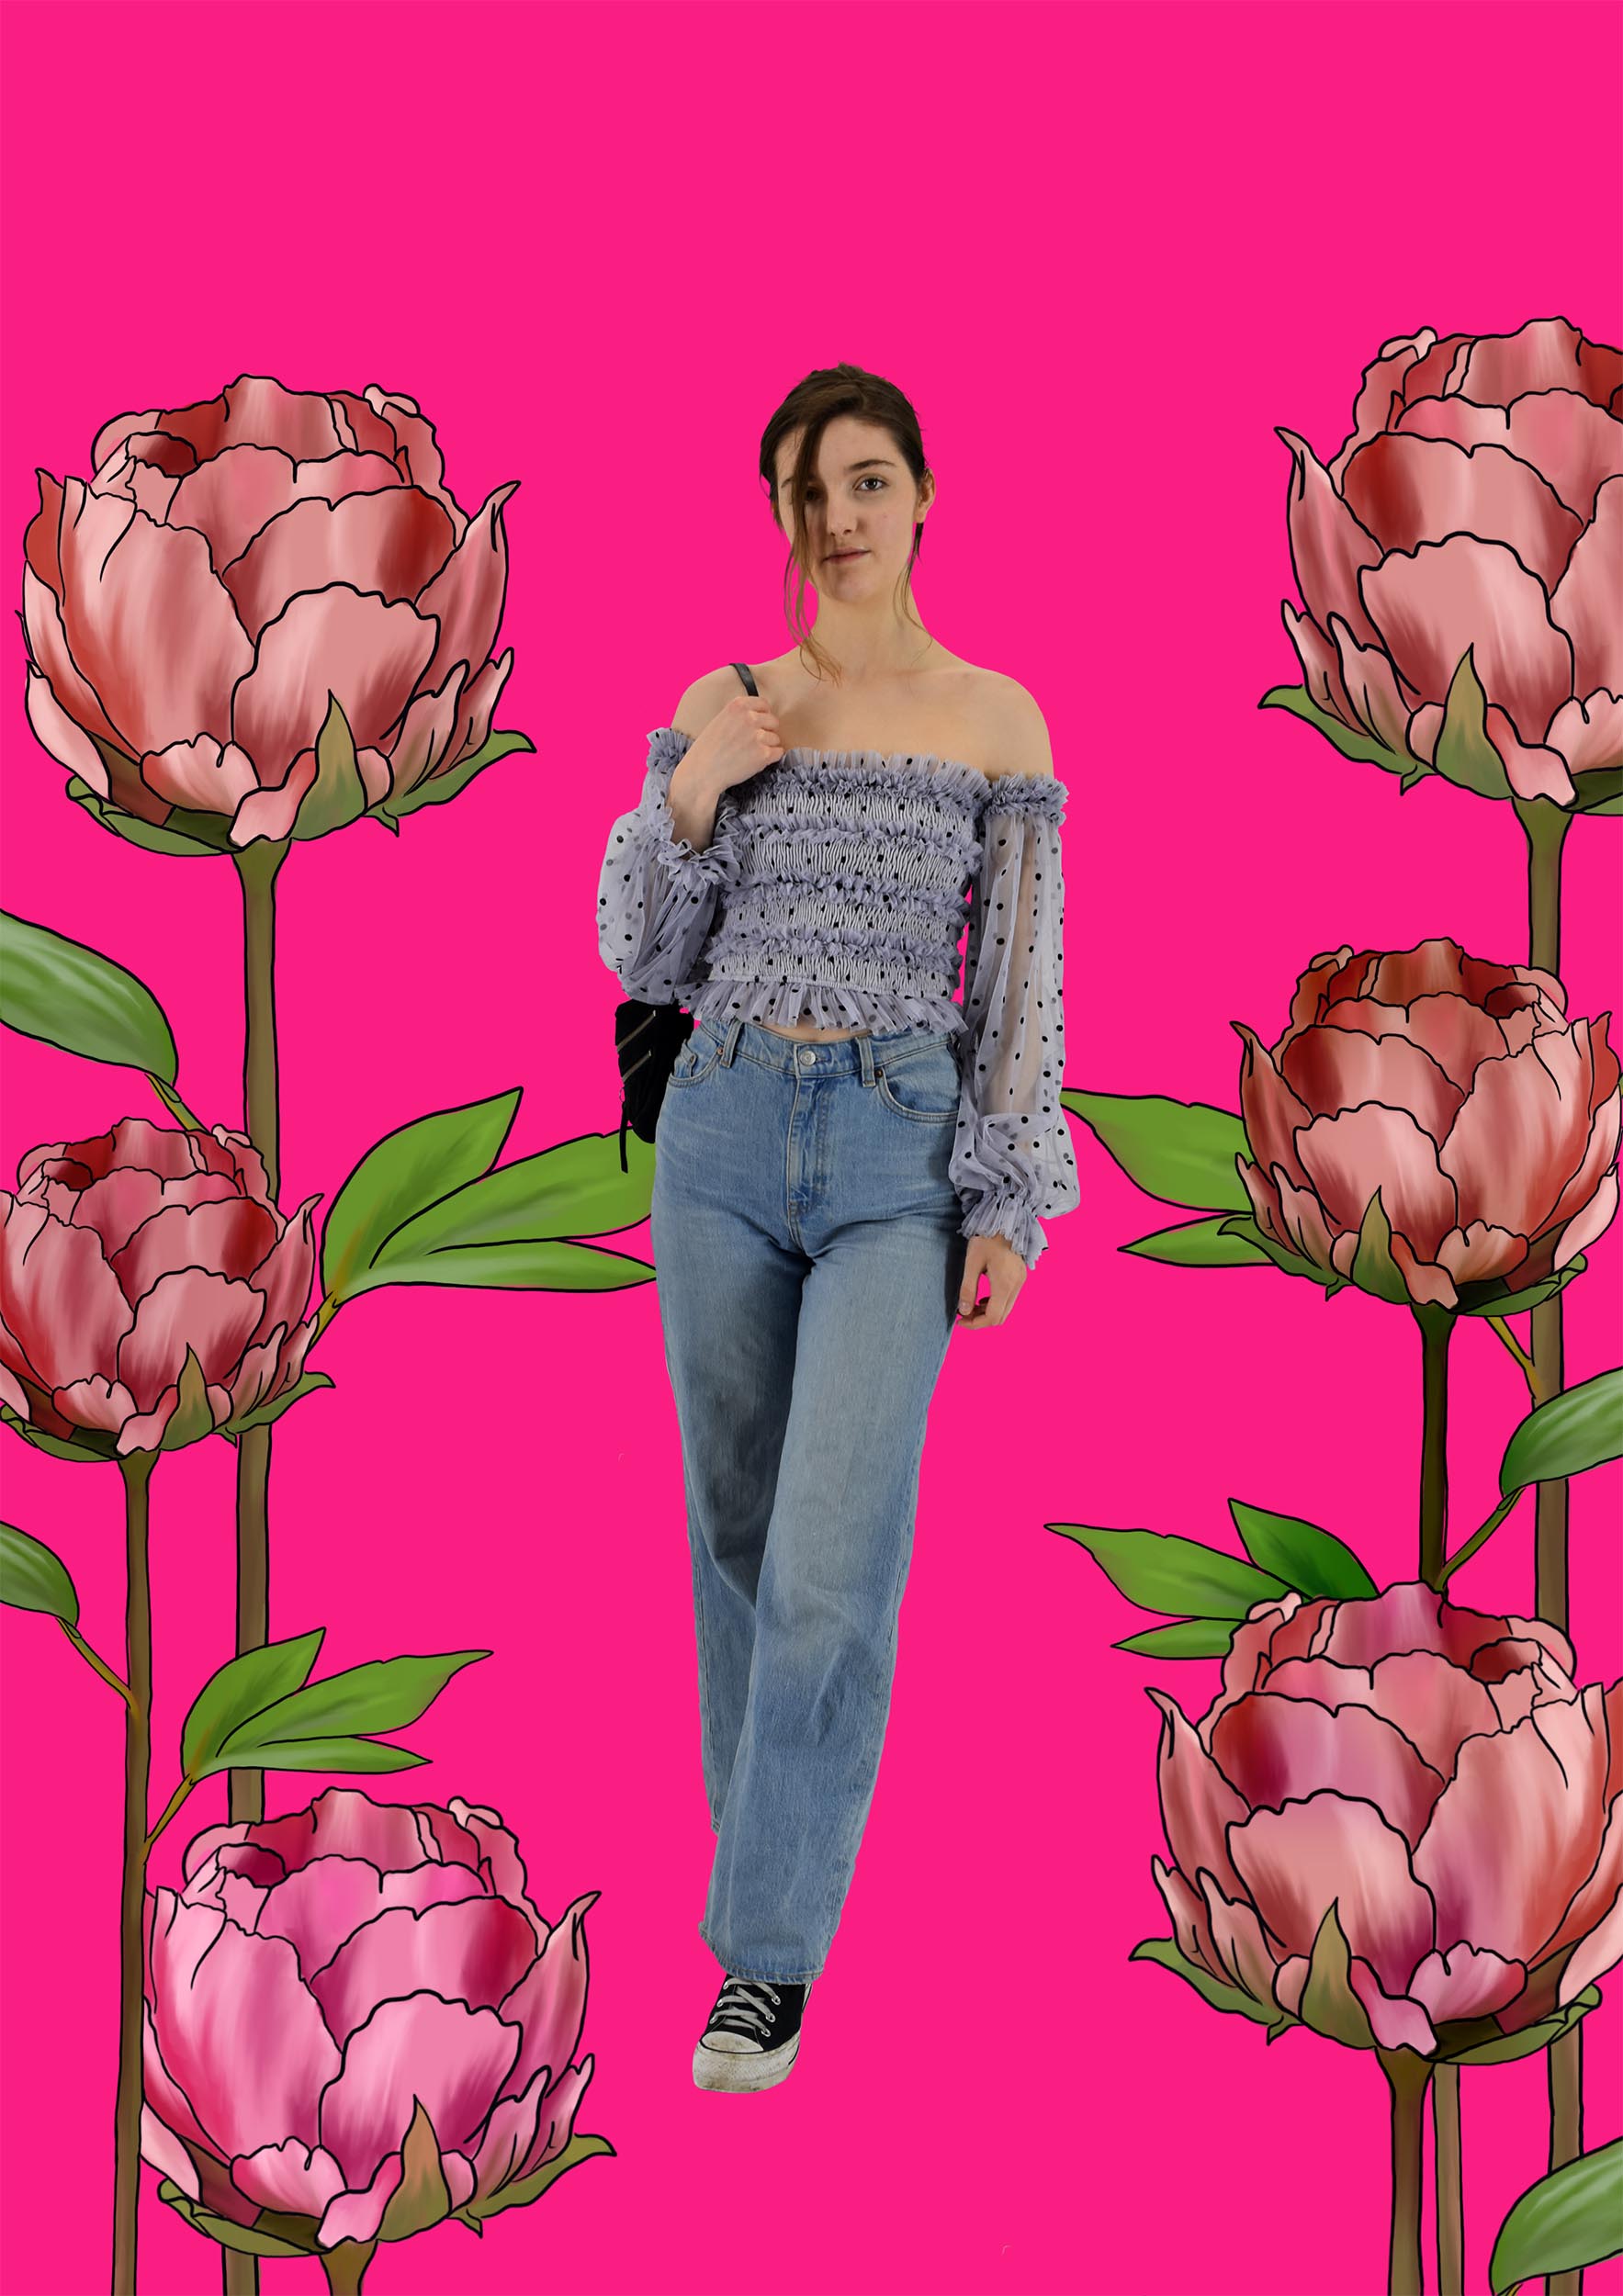 A woman looking forward is stood in the middle of a bright pink background, surrounded by large illustrated pink Peonies.